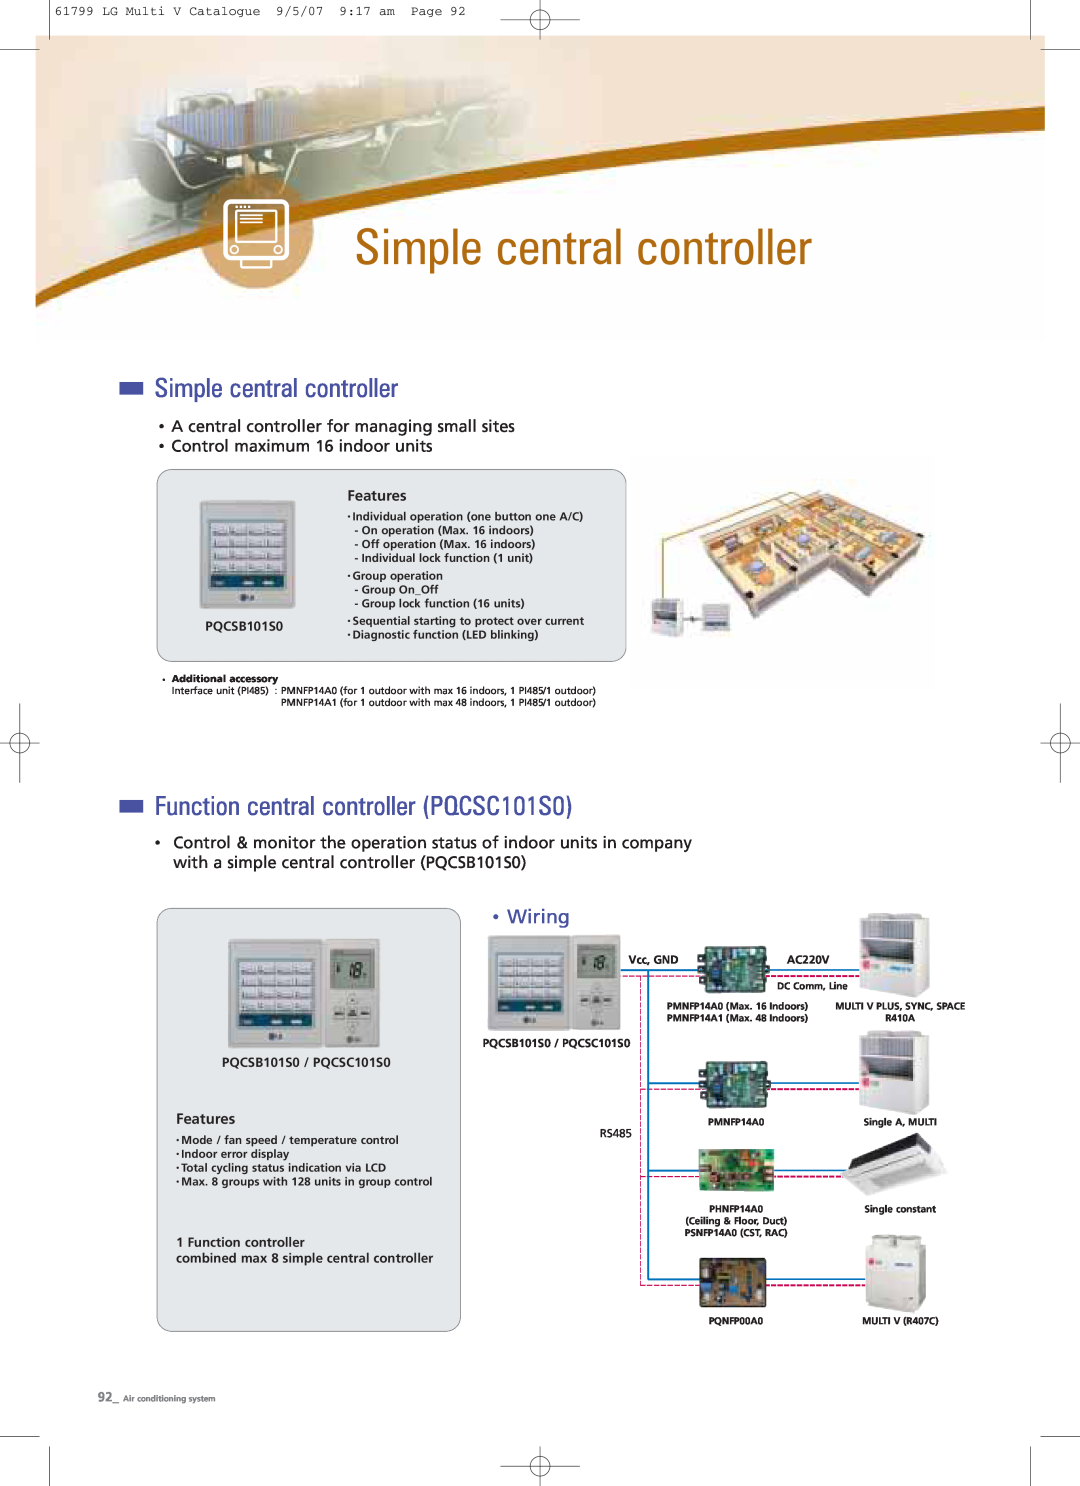 LG Electronics PRHR040 manual Simple central controller, Function central controller PQCSC101S0, Wiring, PQCSB101S0 